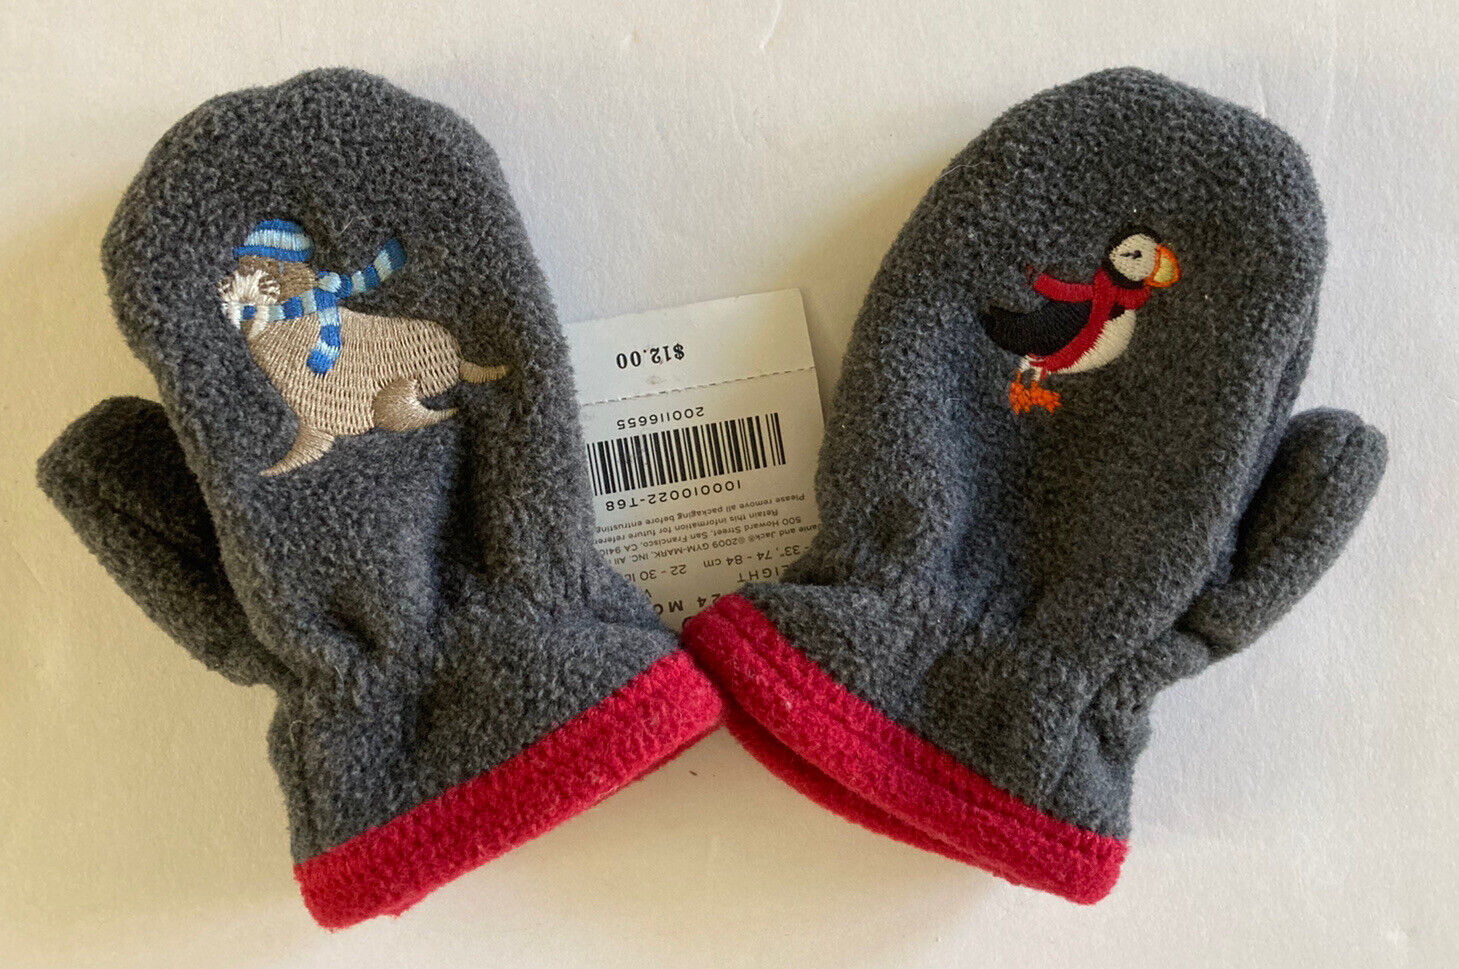 Nwt Janie & Jack Iceburg Frost 12-24 Month Charcoal Fleece Puffin Walrus Mittens